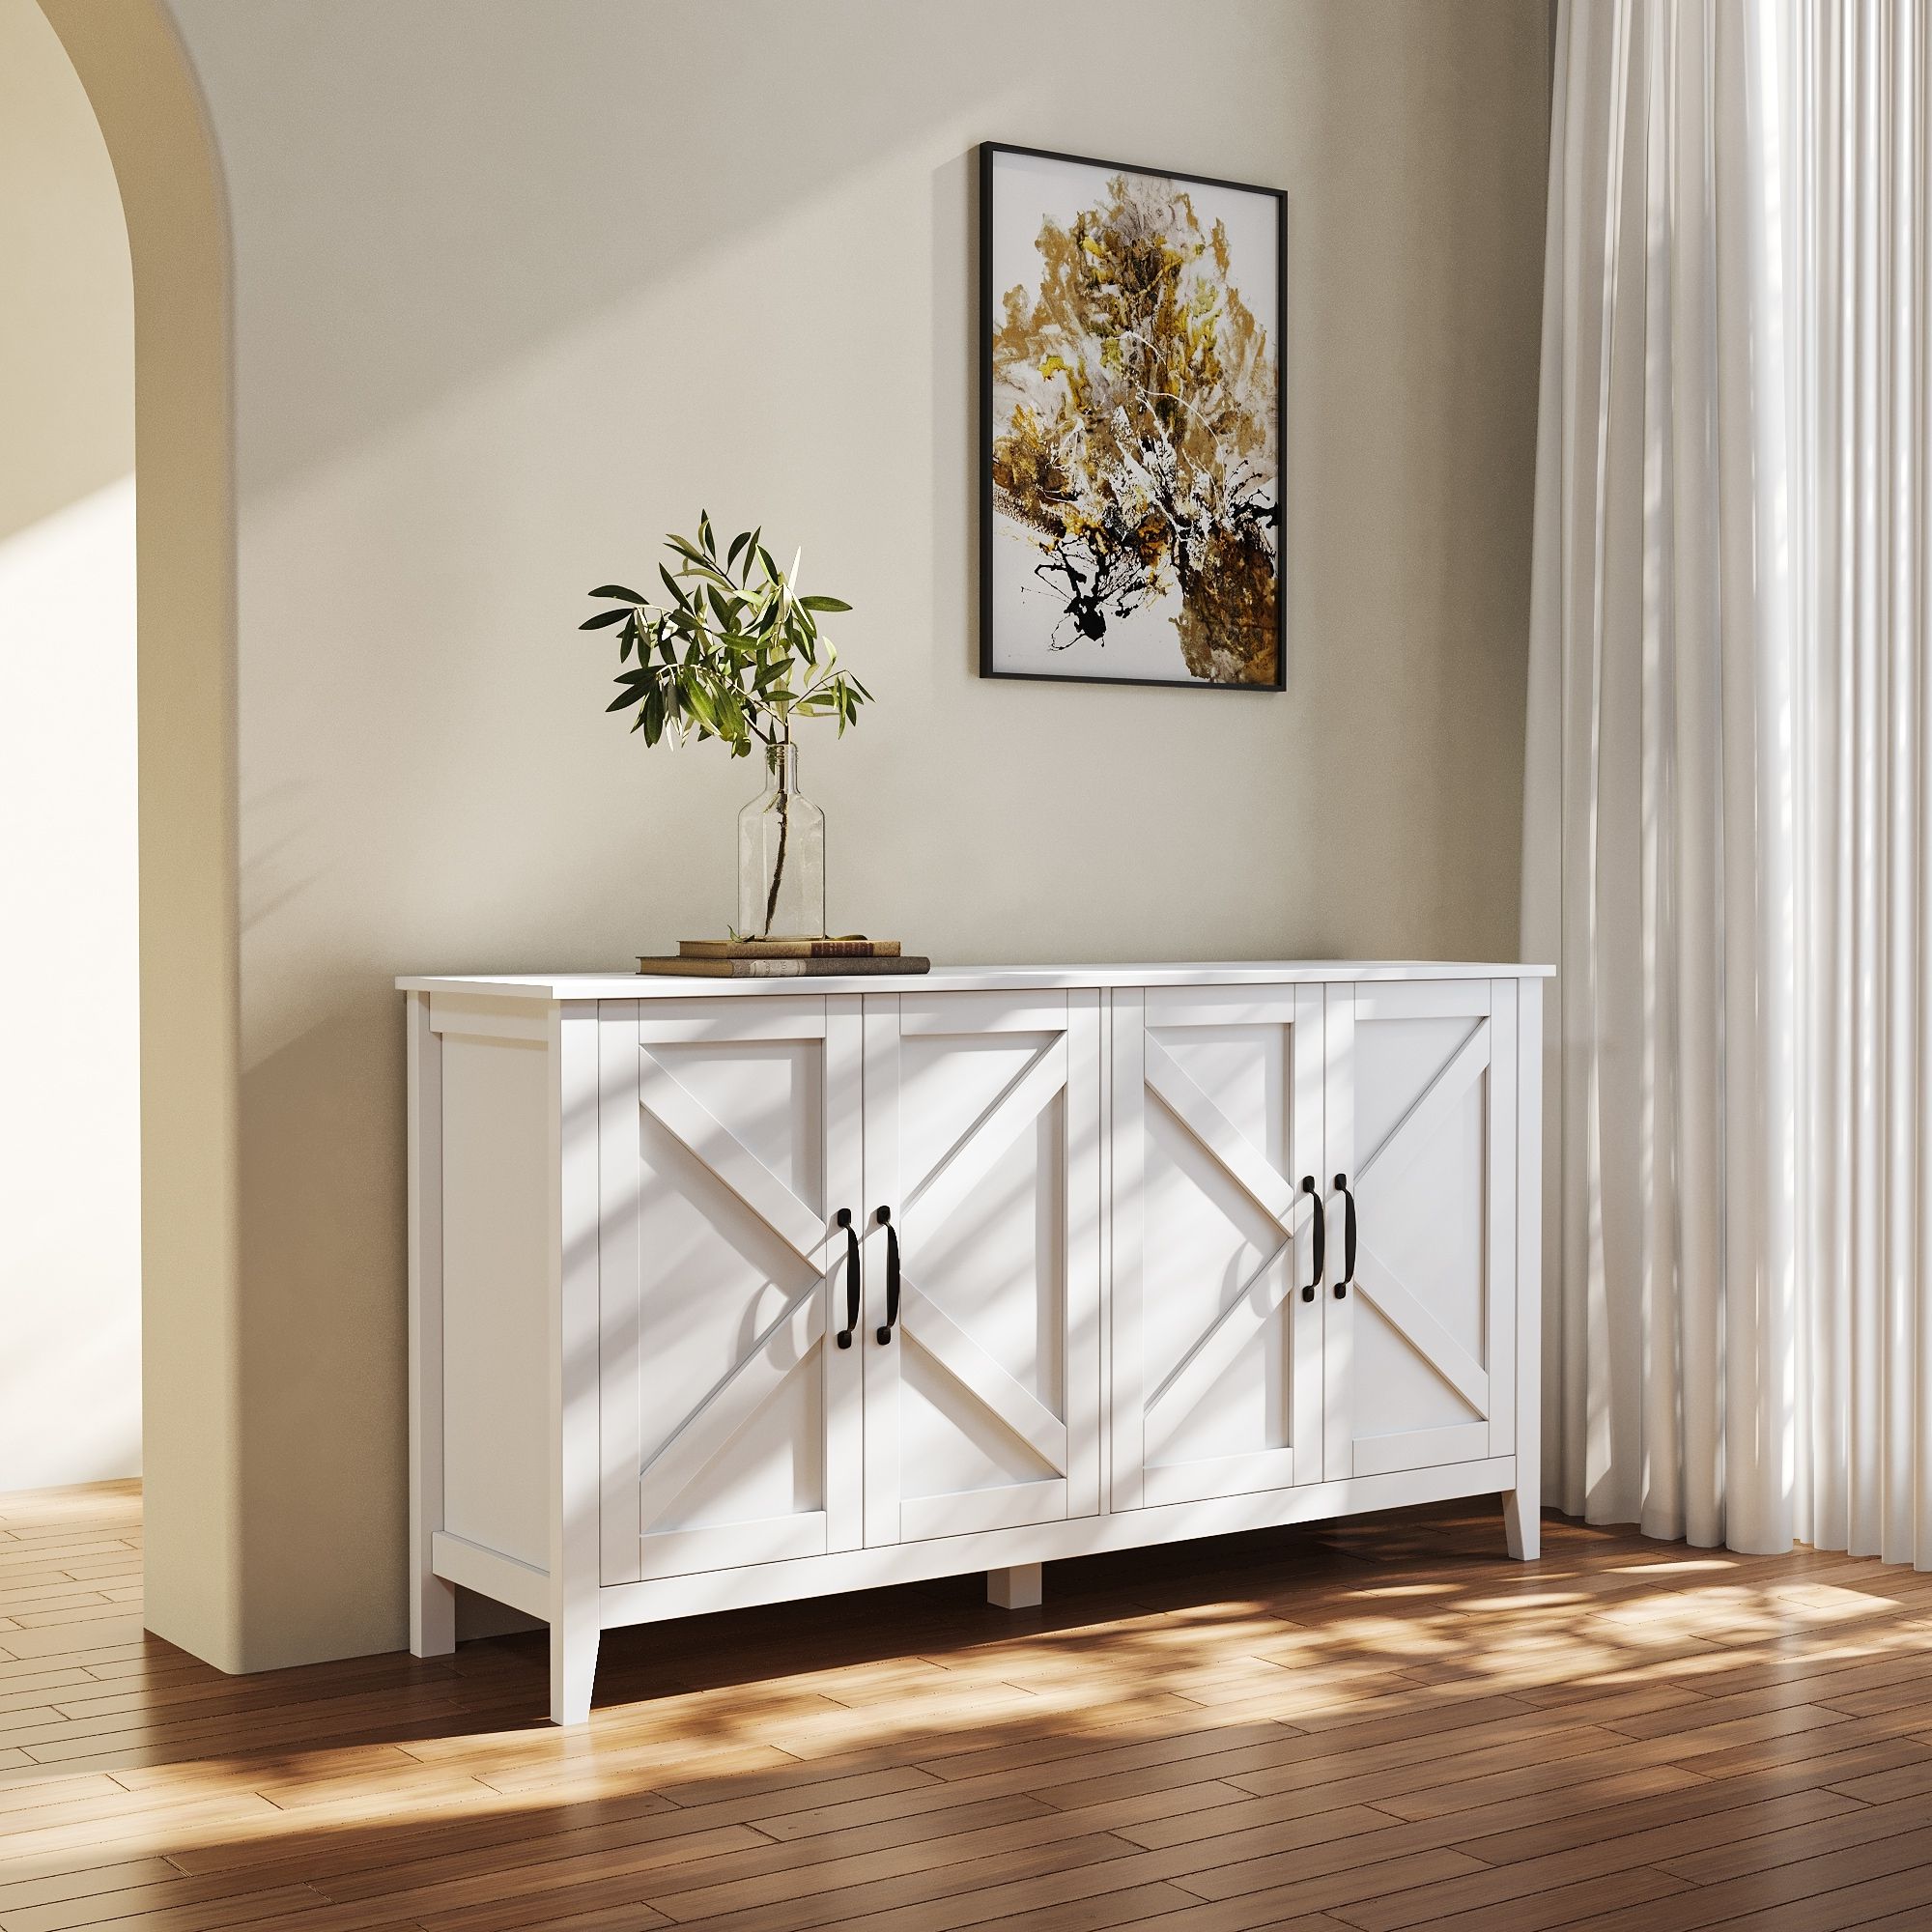 Sideboard Storage Entryway Floor Cabinet With 4 Shelves – Bed Bath & Beyond  – 37068169 With Best And Newest Sideboards For Entryway (View 5 of 15)